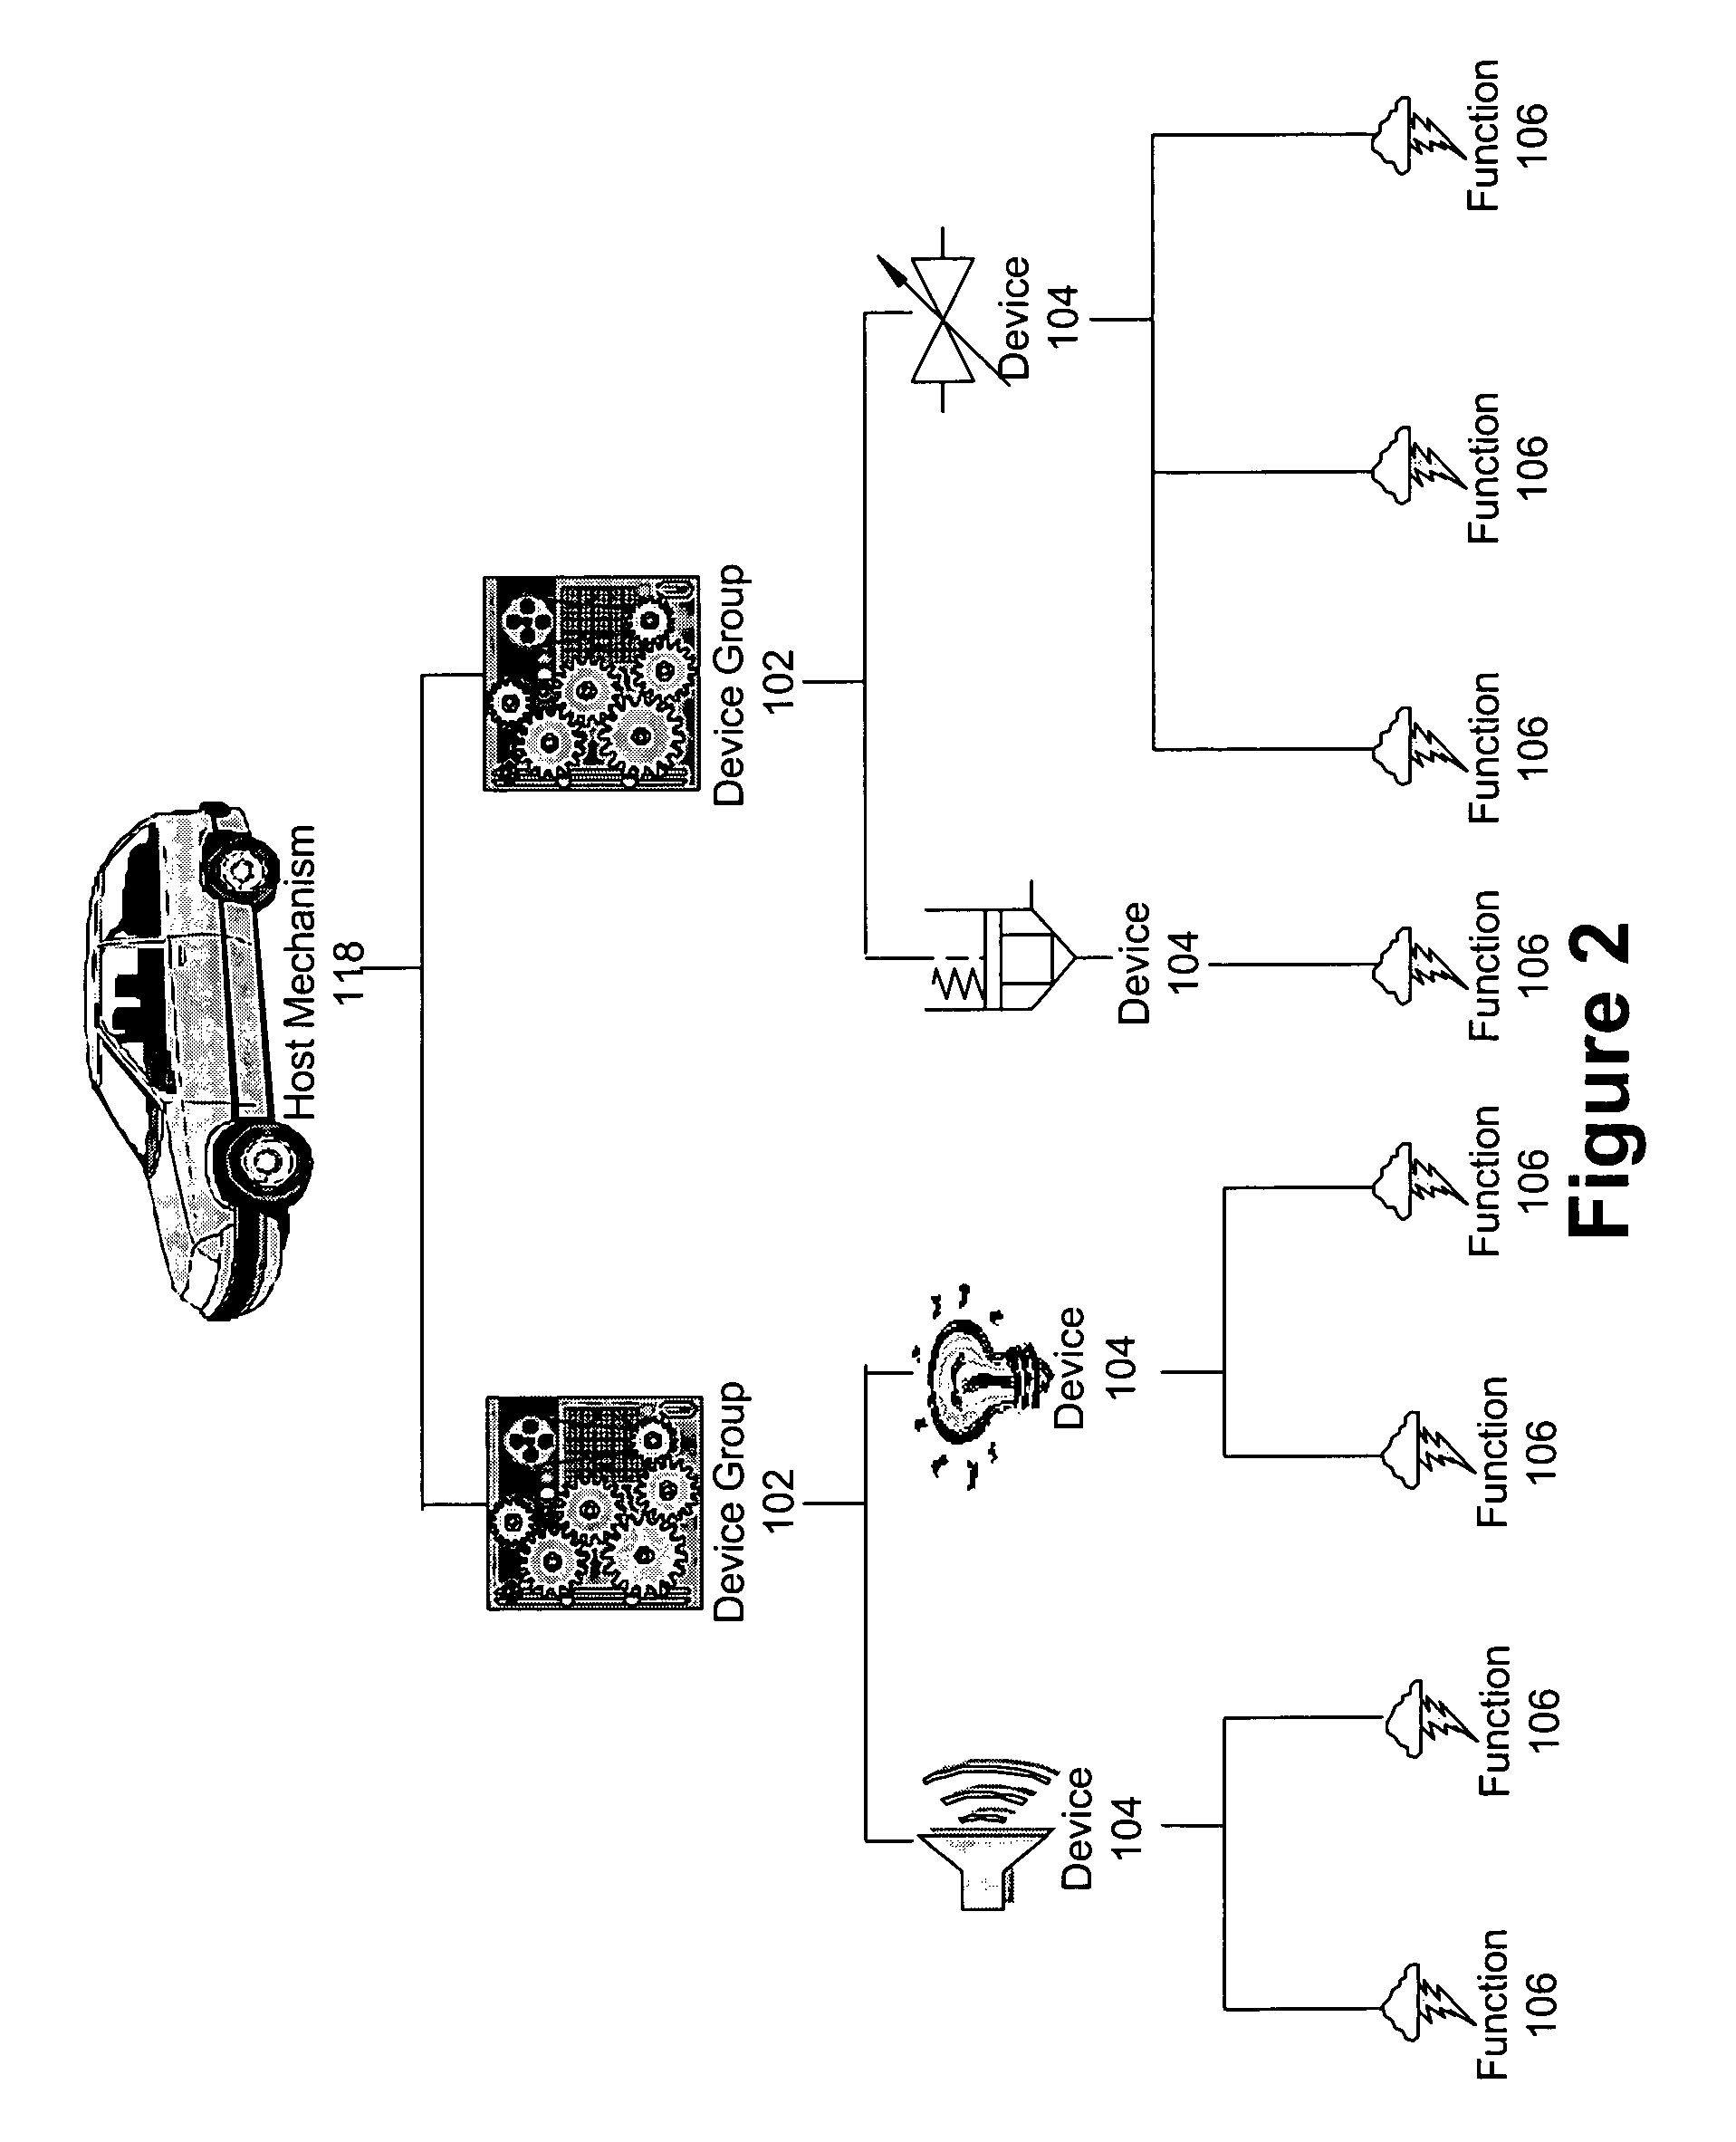 System and method for managing devices